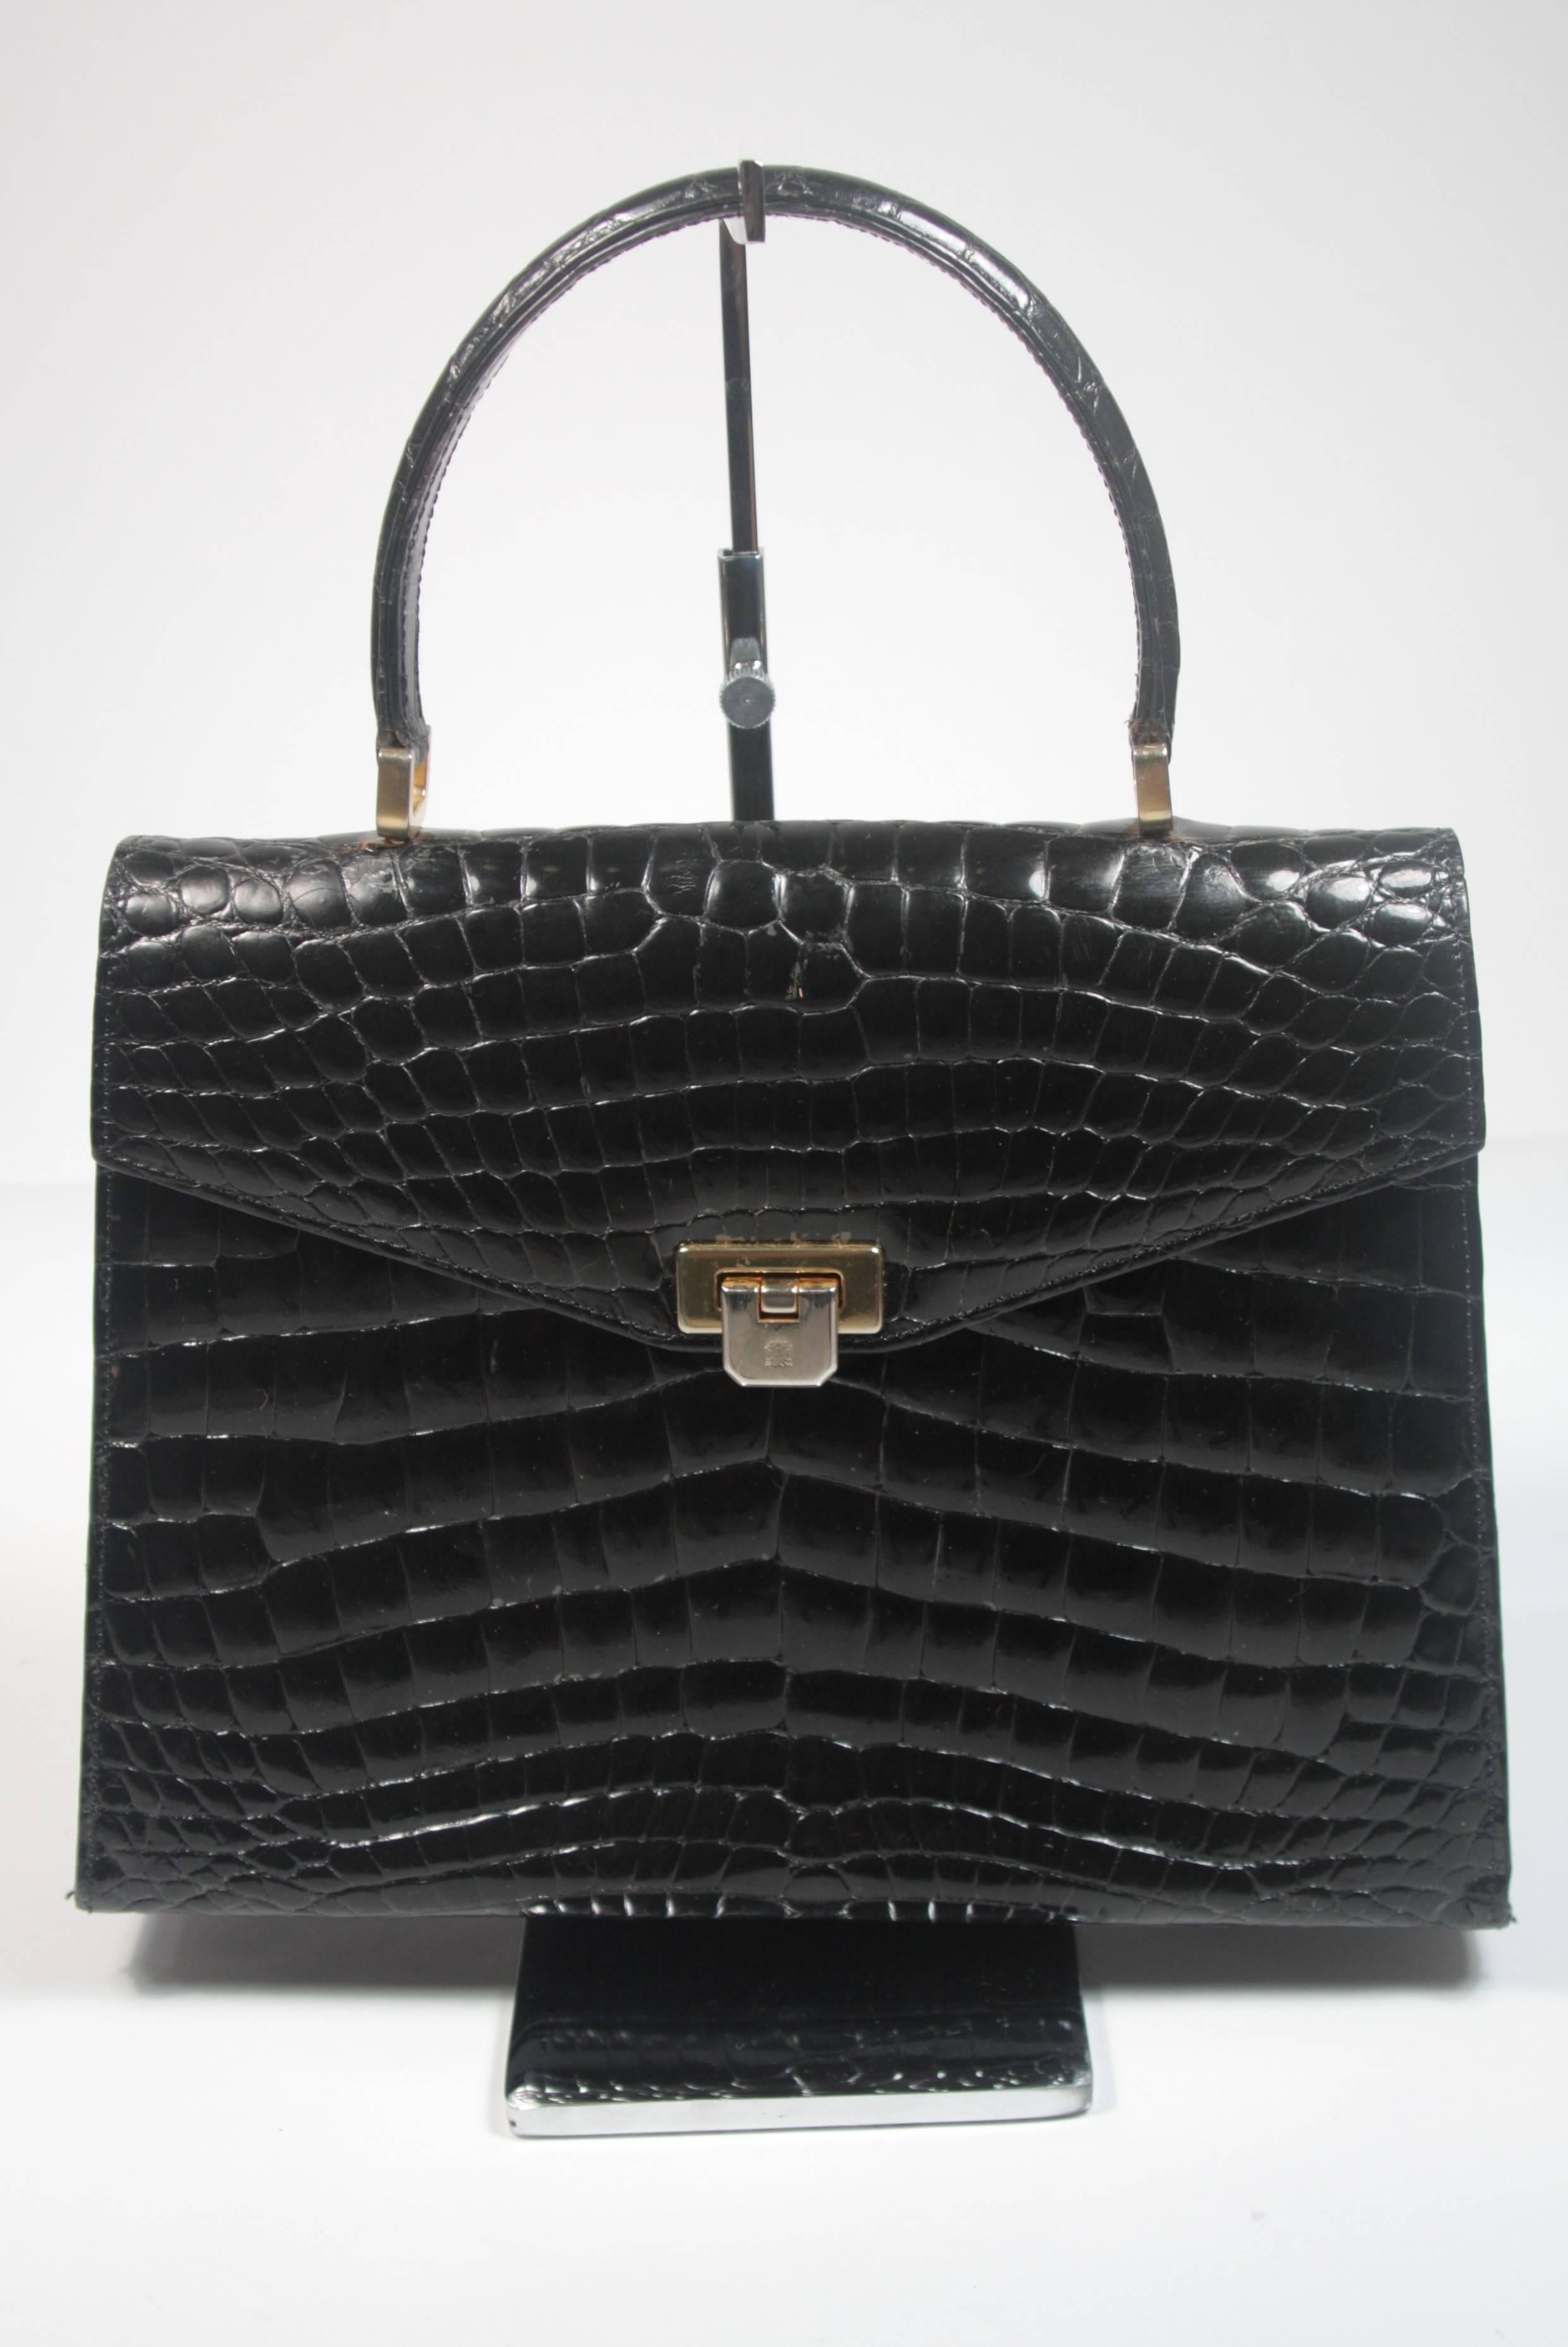 This Amir Italy handbag is composed of black Crocodile. It features multiple interior compartments and a back slot pocket. In excellent vintage condition. Made in Italy. 

**Please cross-reference measurements for personal accuracy.